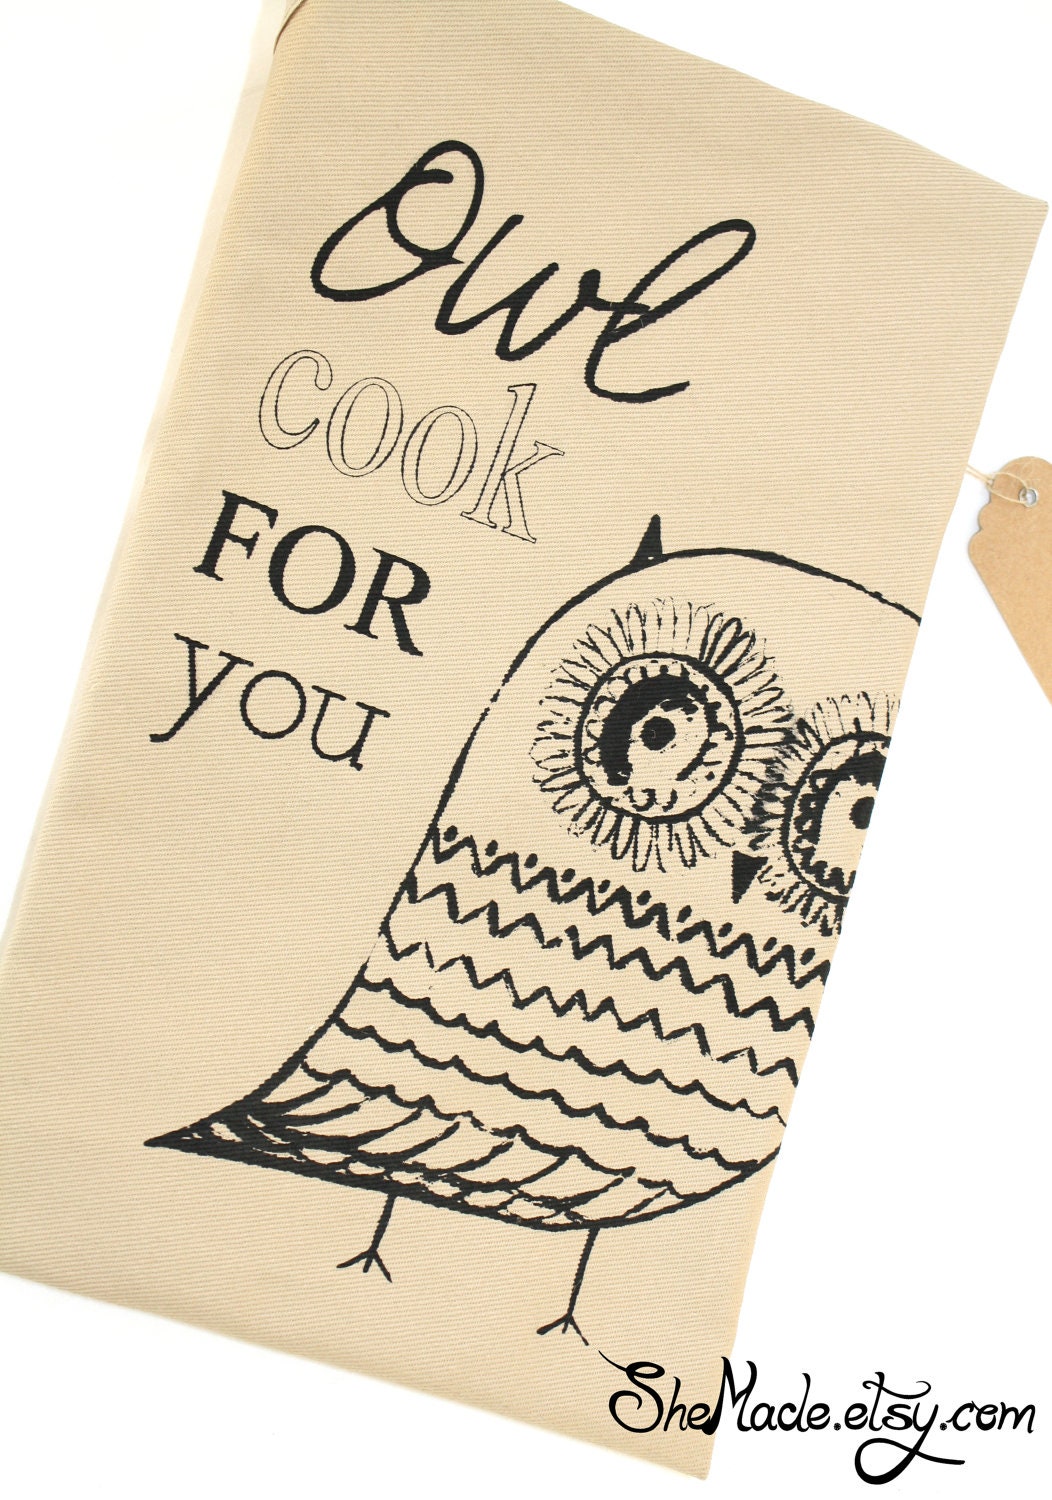 Adult Apron Owl Cook For You Owl Print Tan Cream Or By Shemade 